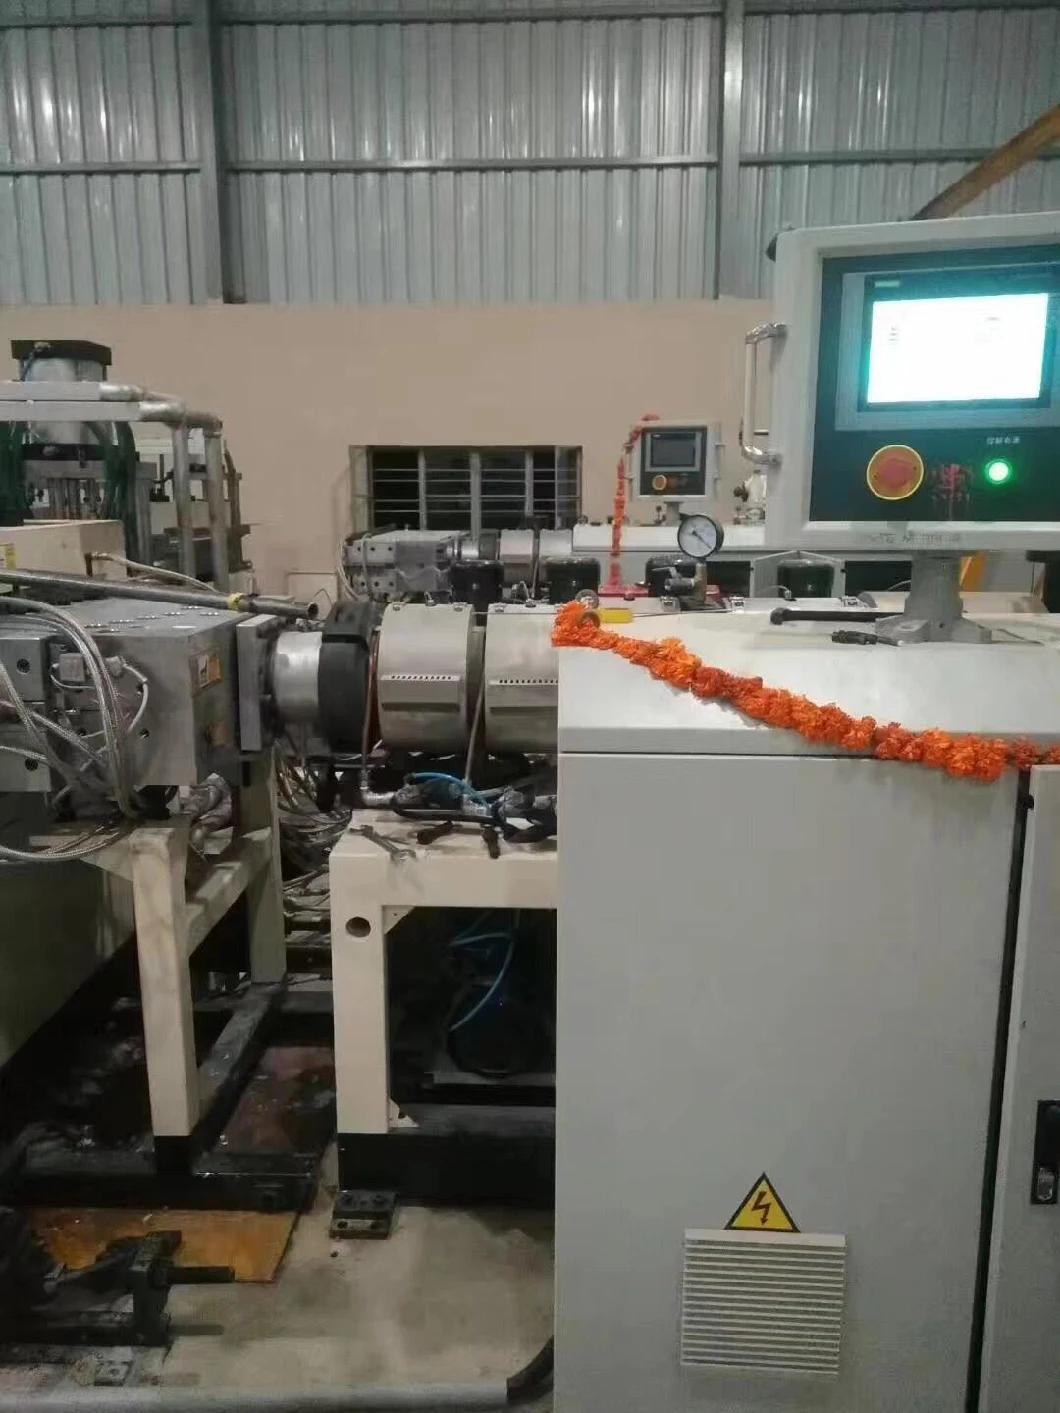 Modified Plastic Sheet and Plate Extrusion Line